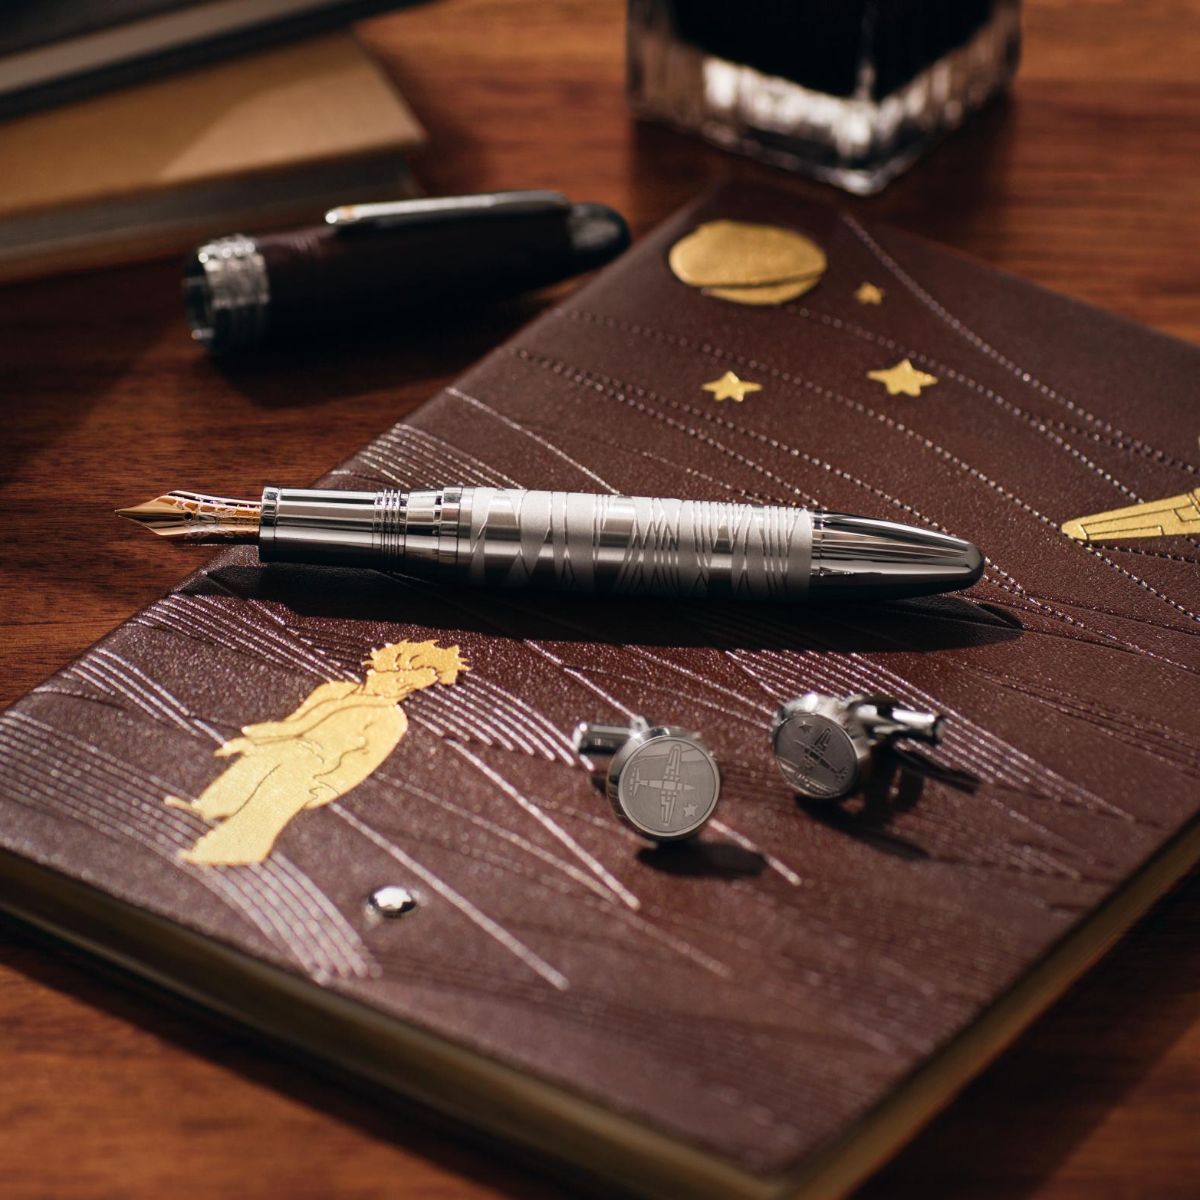 Anticipation is half the fun. Choosing and wrapping gifts is just as exciting as giving when you know you will get the right reaction from those who will open them. Shop the Le Petit Prince Collection on www.montblanc.com ...